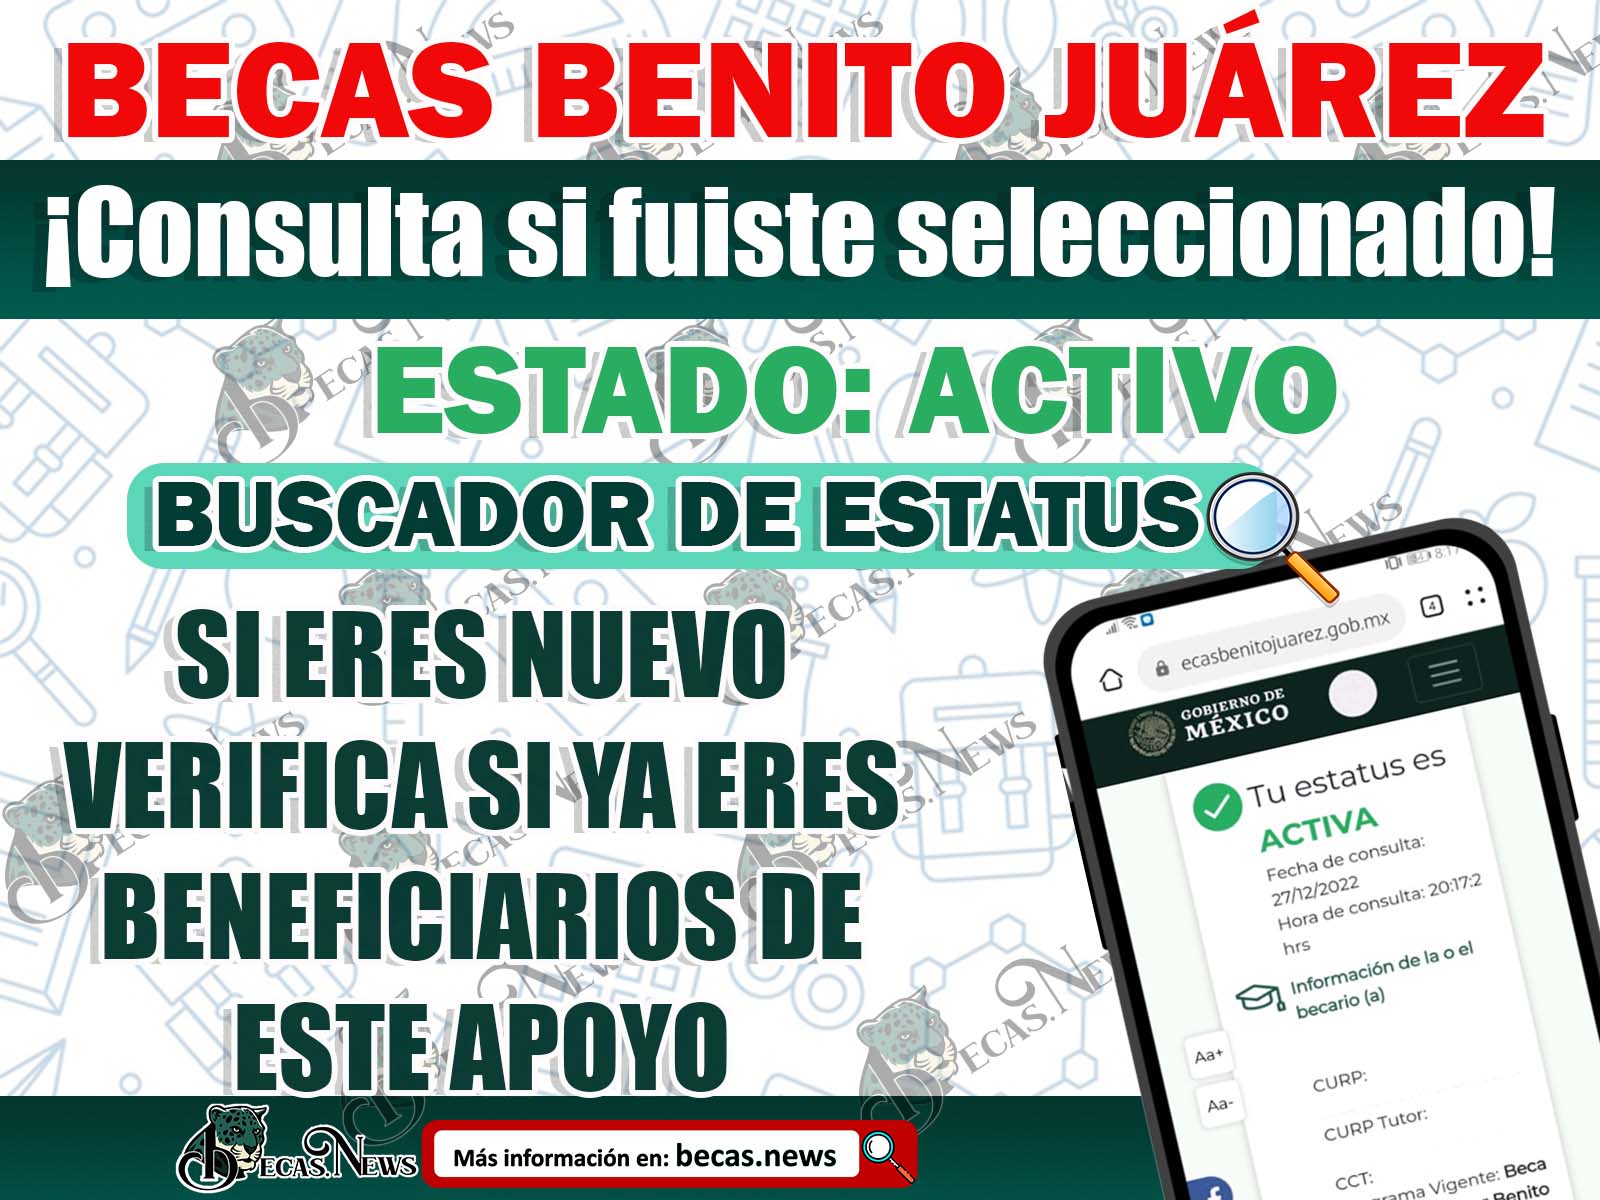 https://becas.news/wp-admin/post.php?post=28497&action=edit